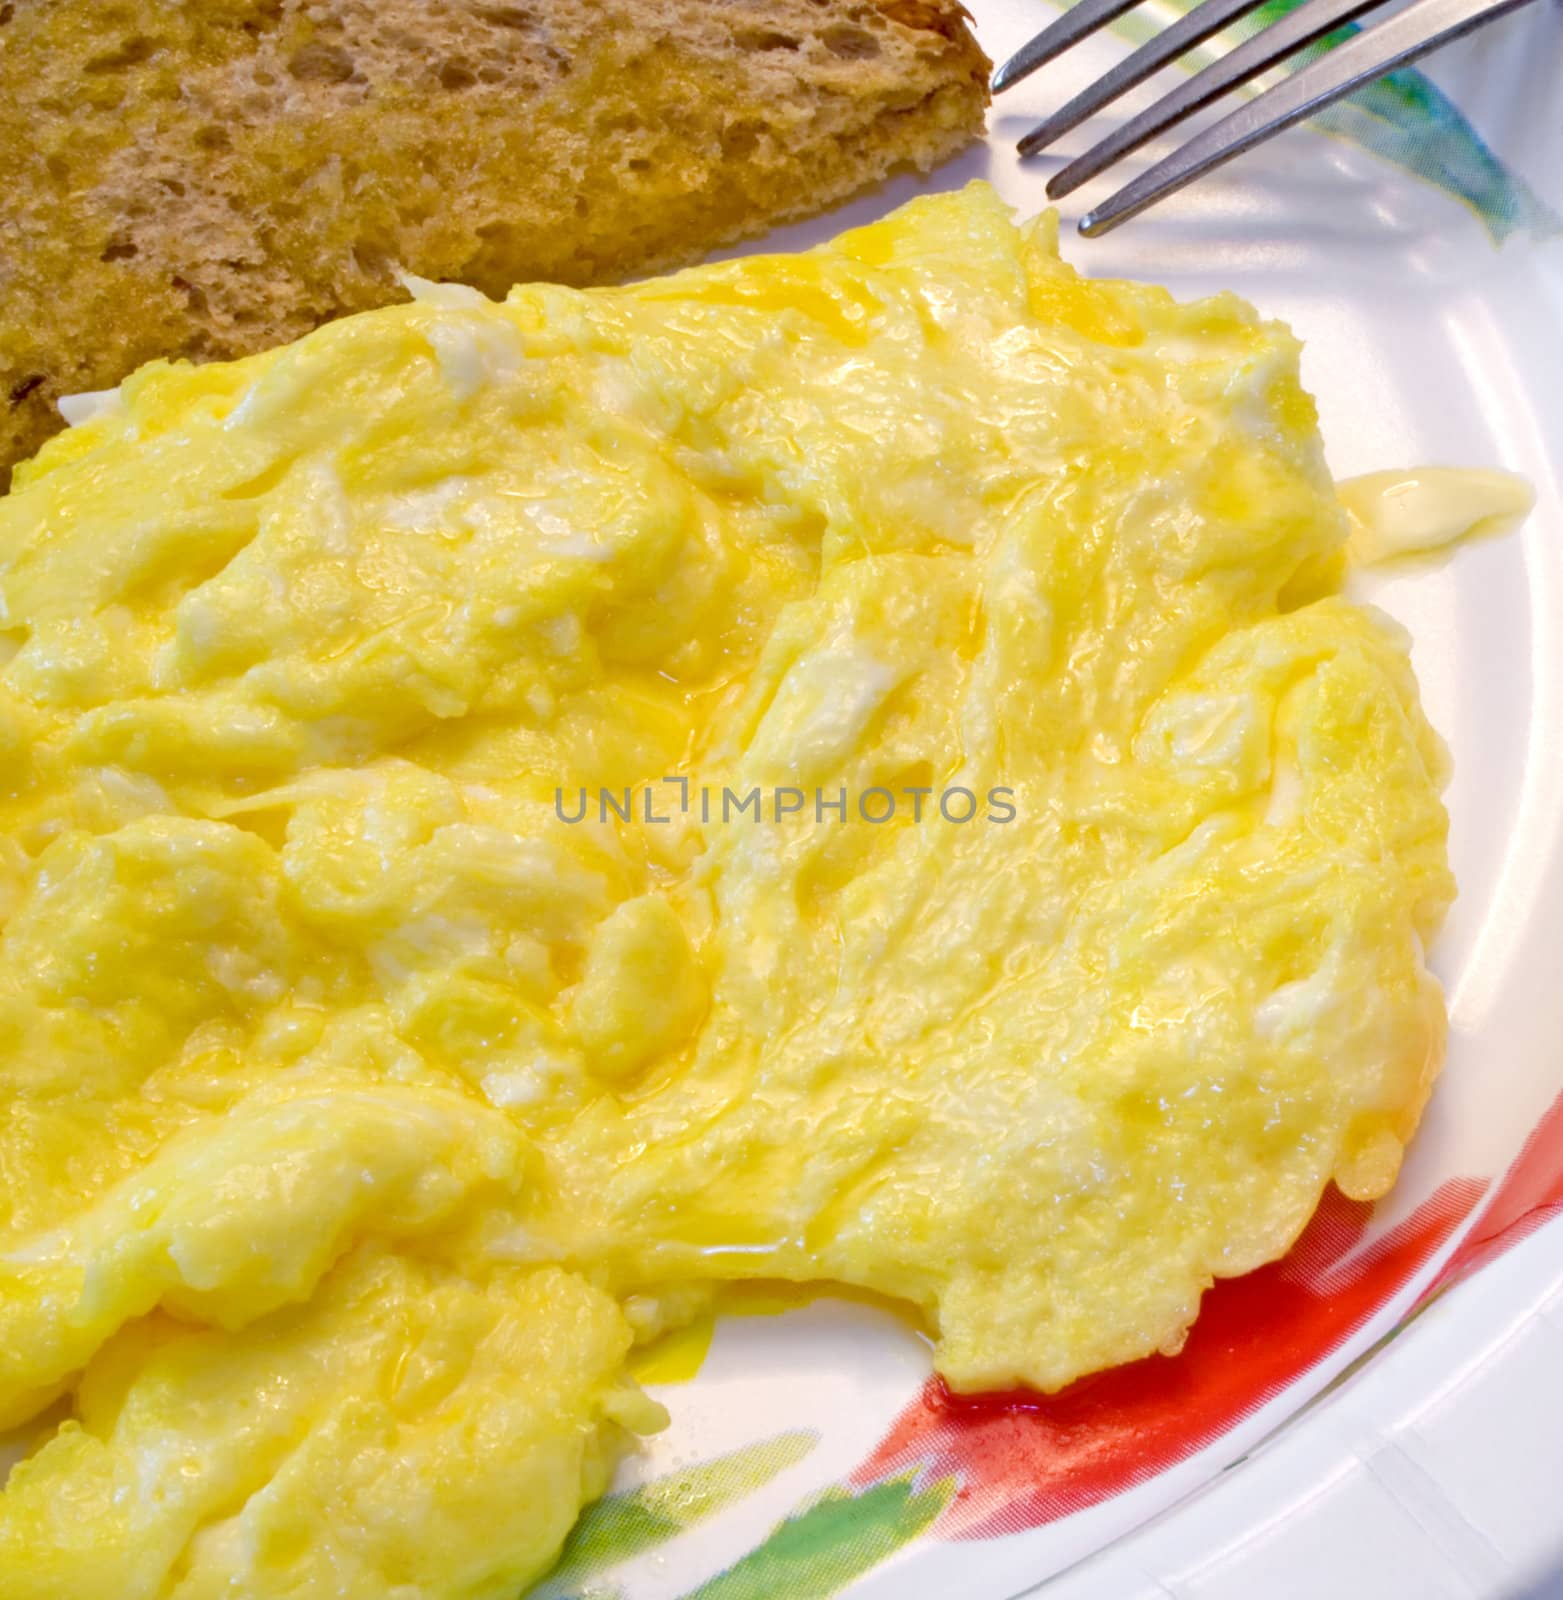 Eggs and toast on paper plate ready to eat or serve